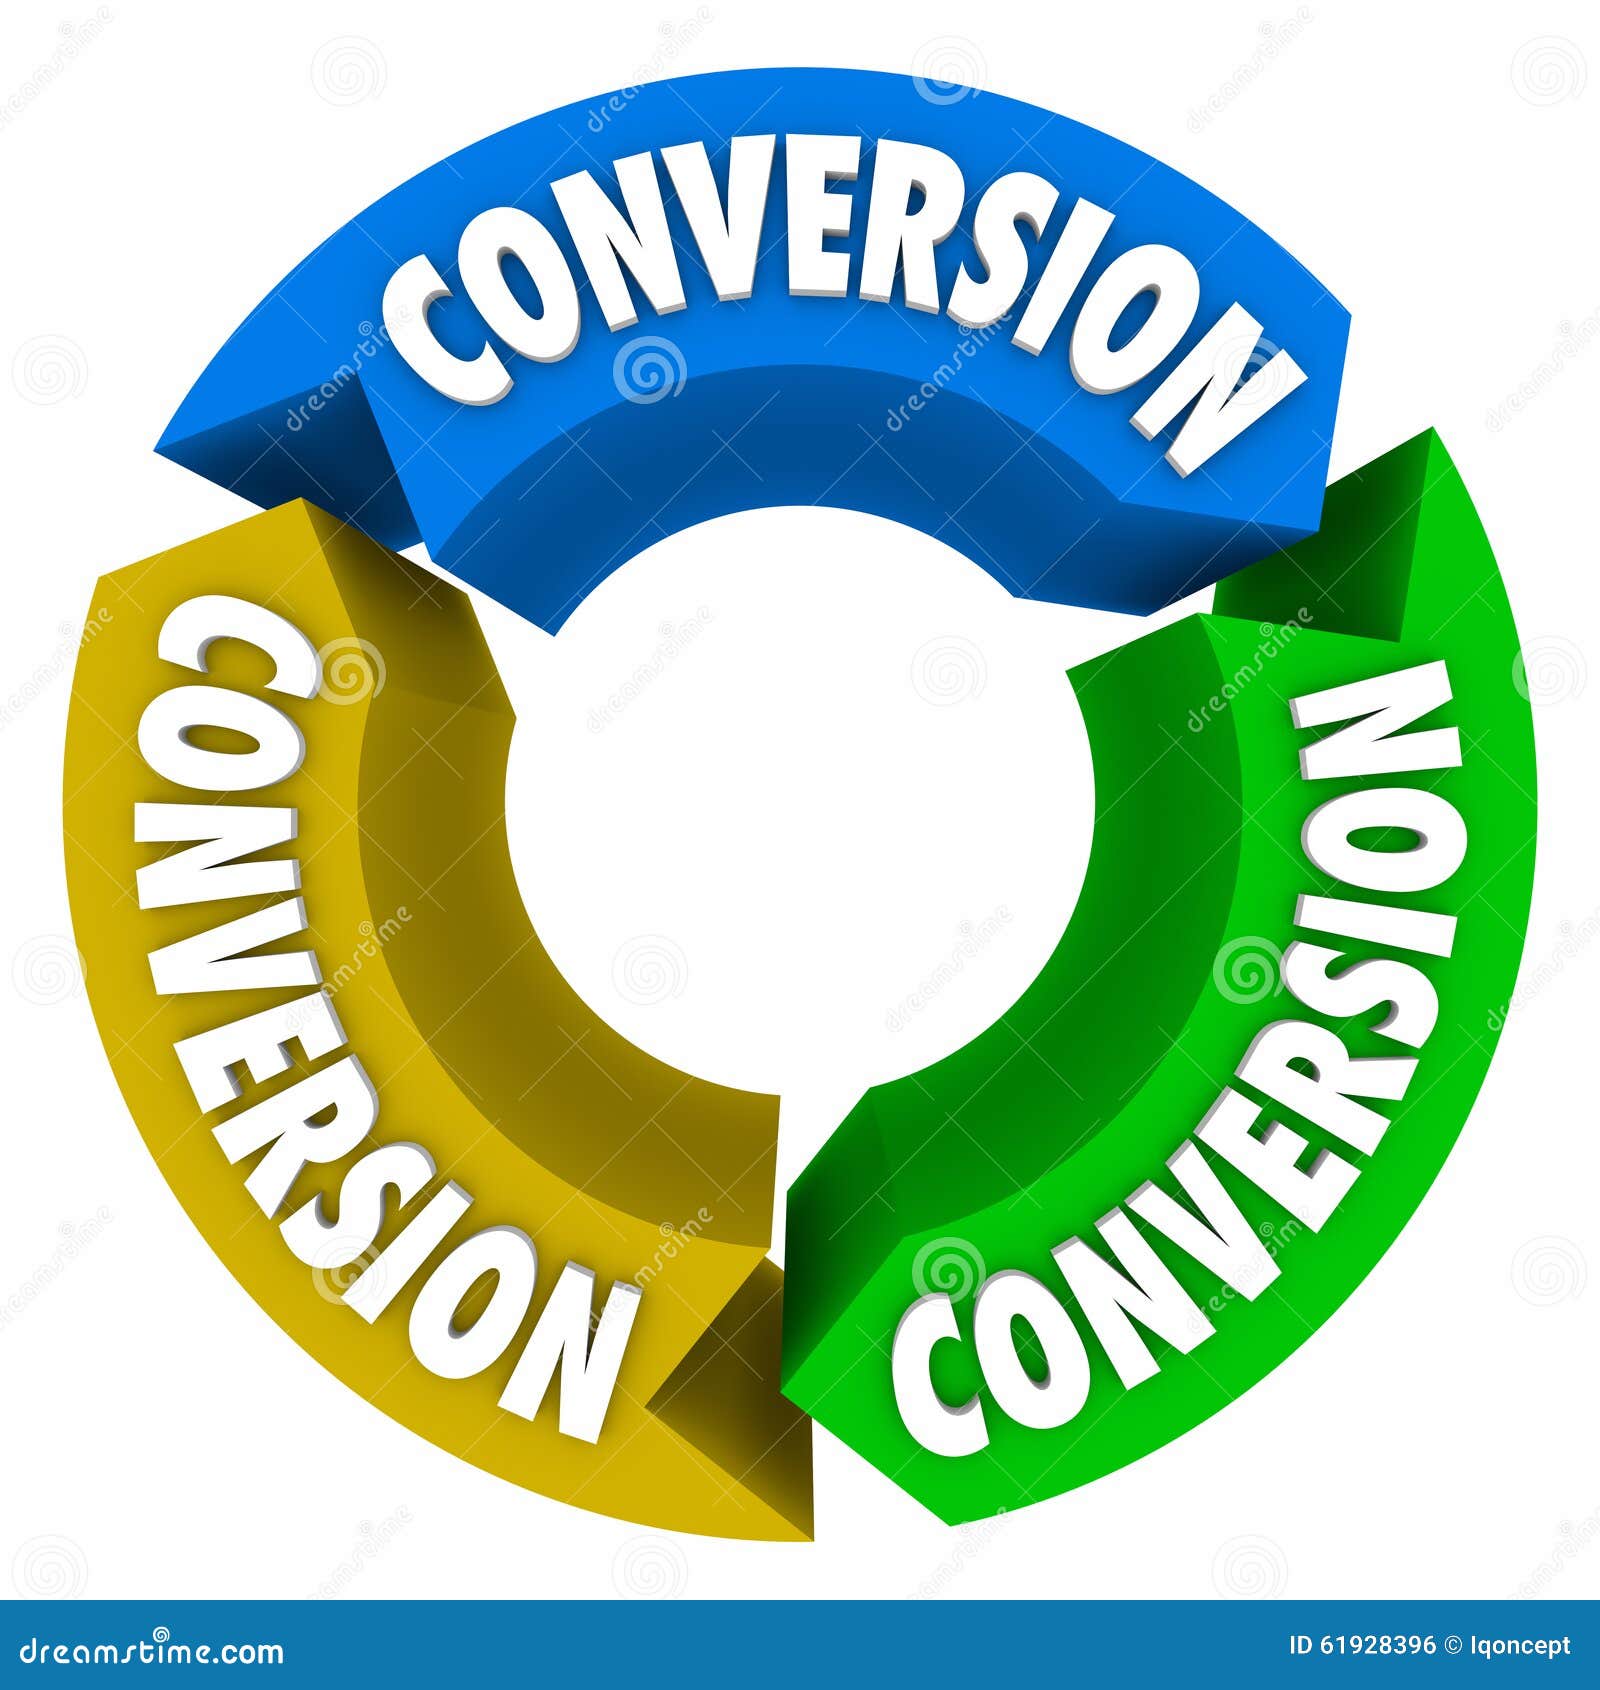 convert photo to clipart online free - photo #15